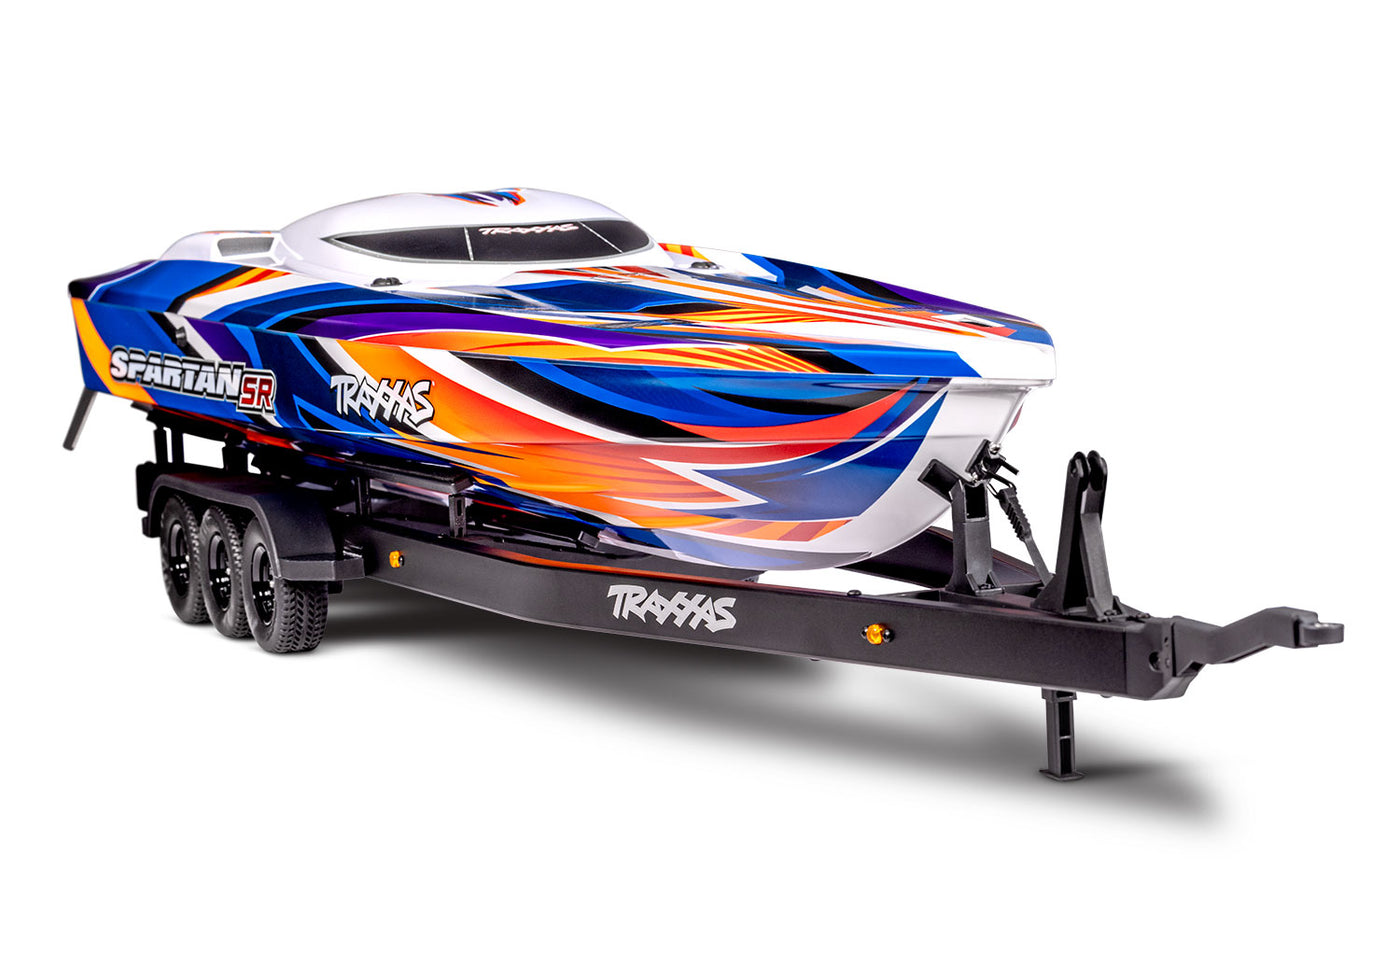 BOAT TRAILER only for SPARTAN and M41 Traxxas 10350